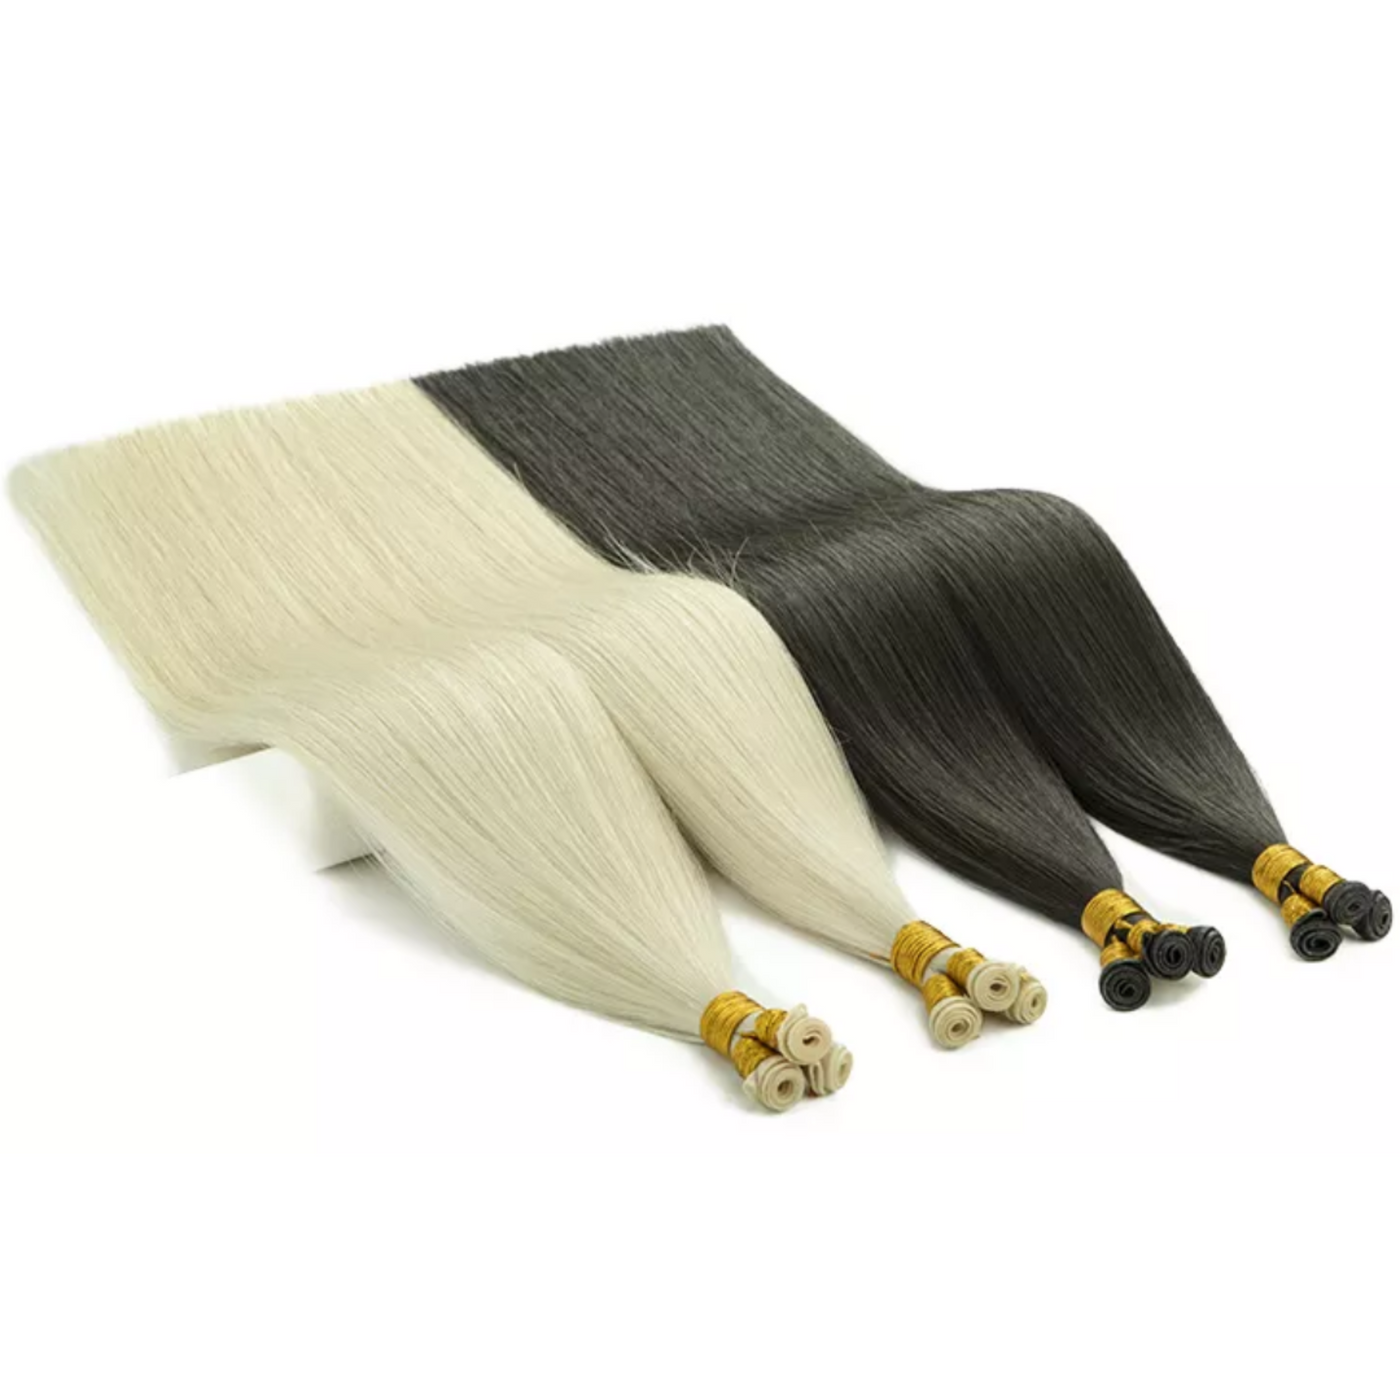 Clutch Weft Hair Extensions 24"